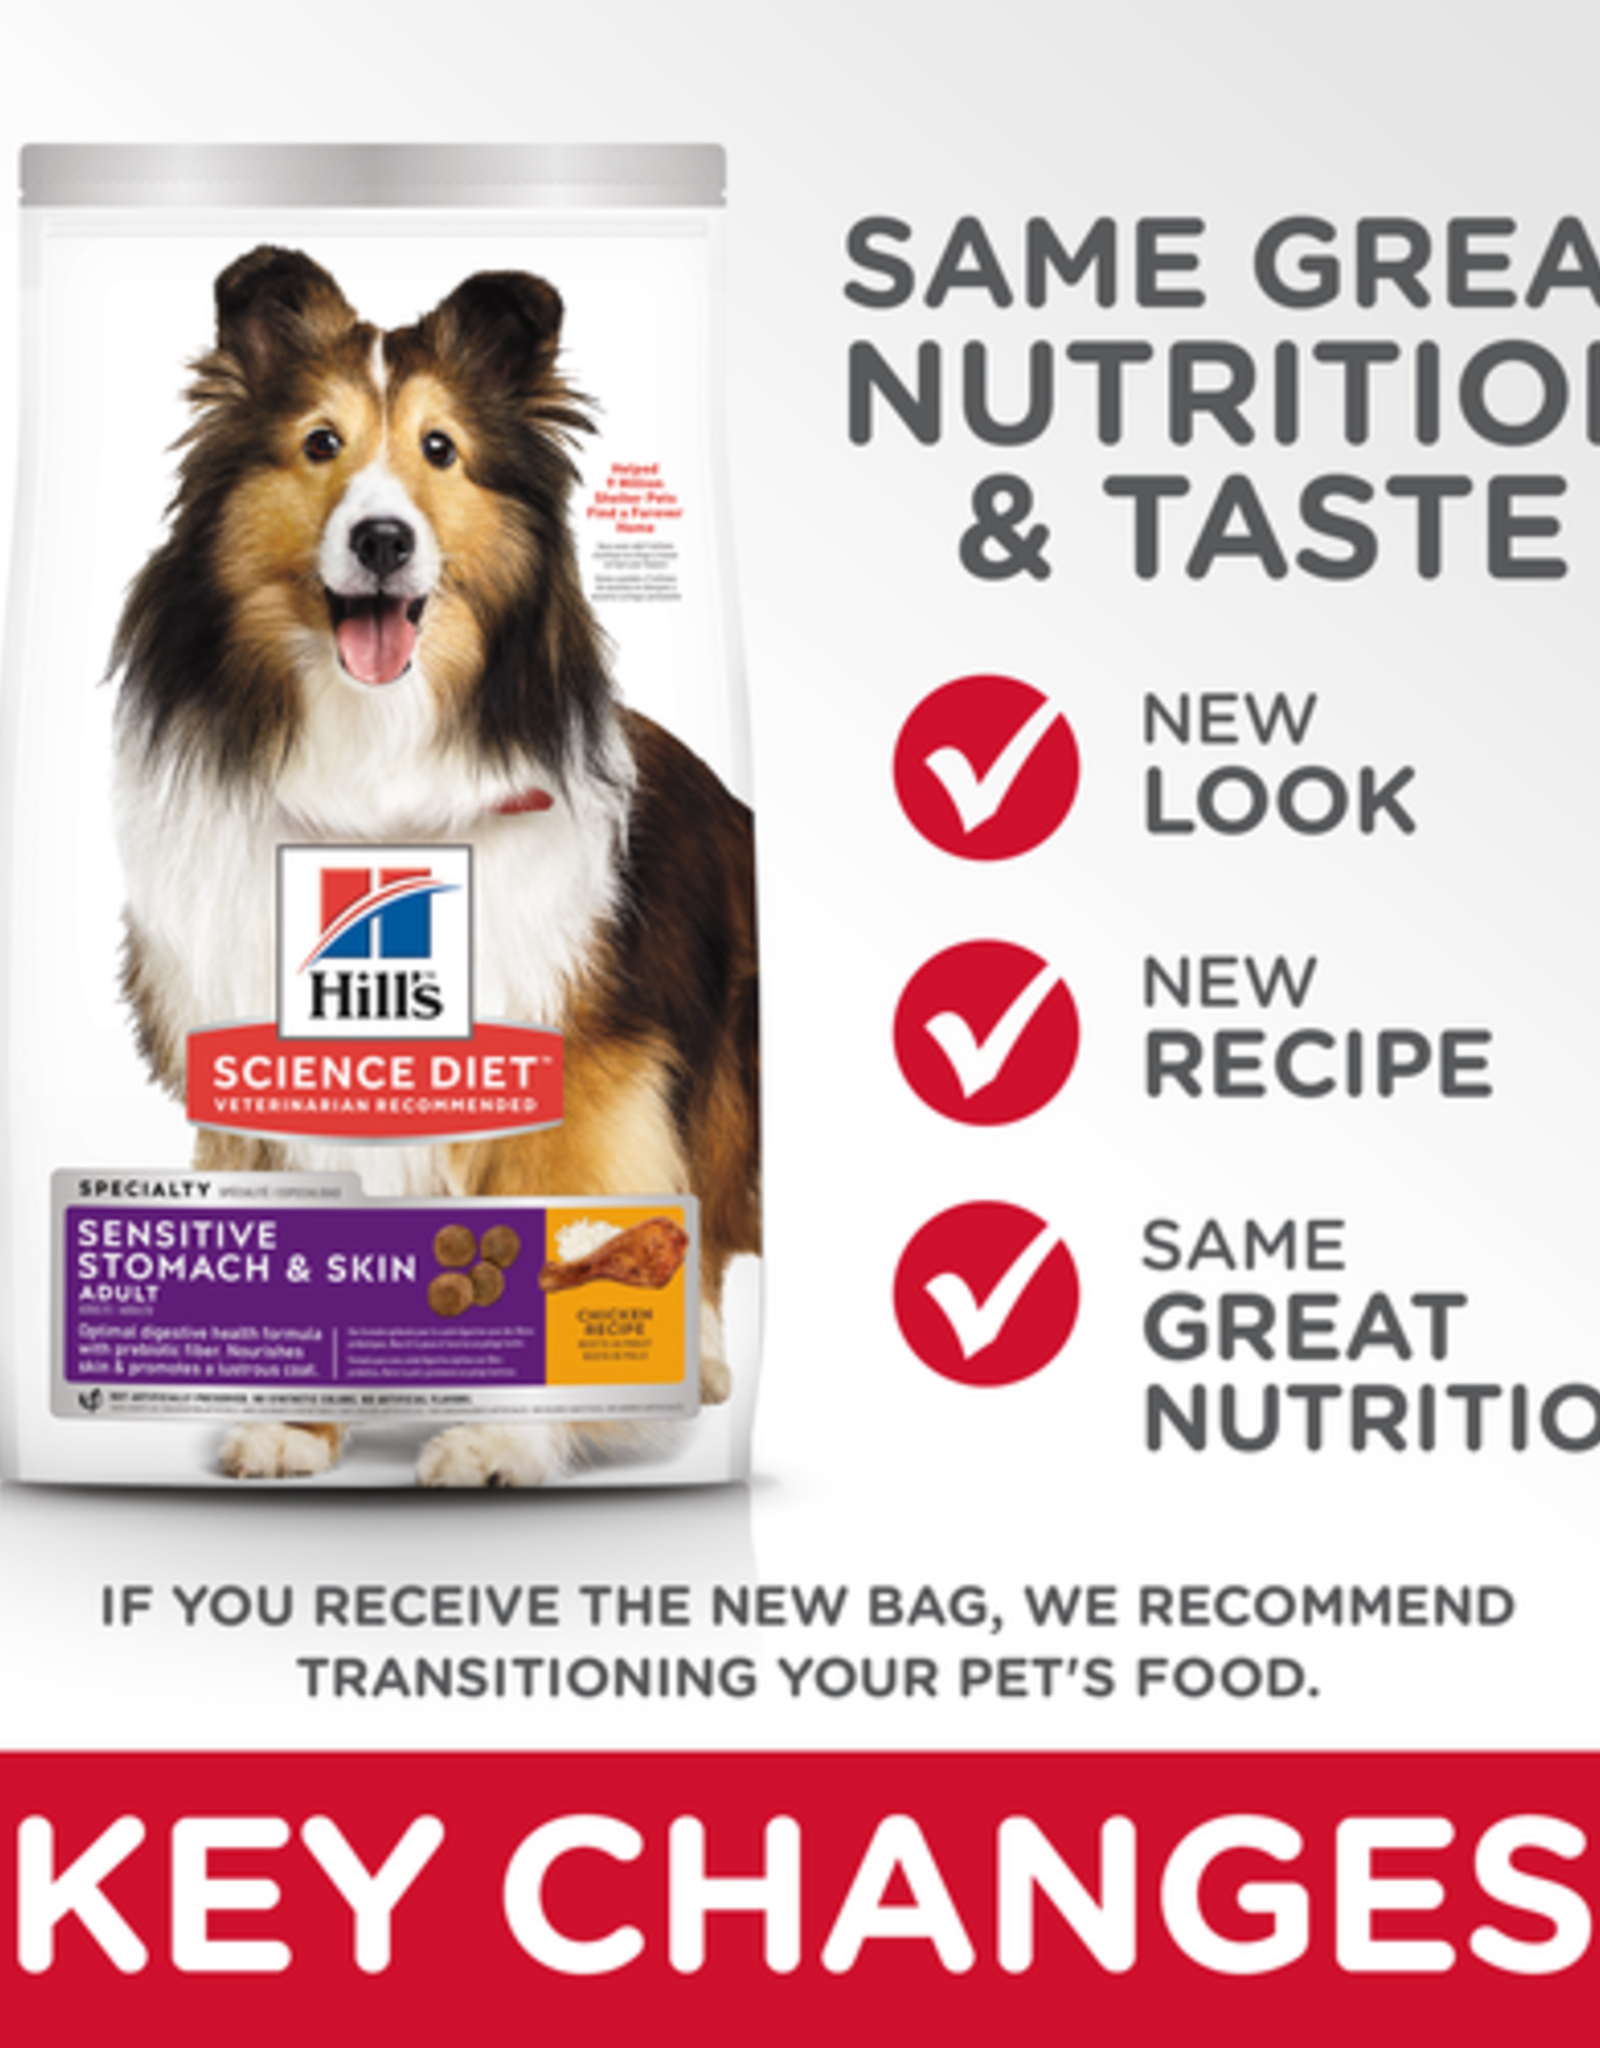 SCIENCE DIET HILL'S SCIENCE DIET CANINE SENSITIVE STOMACH & SKIN 30LBS